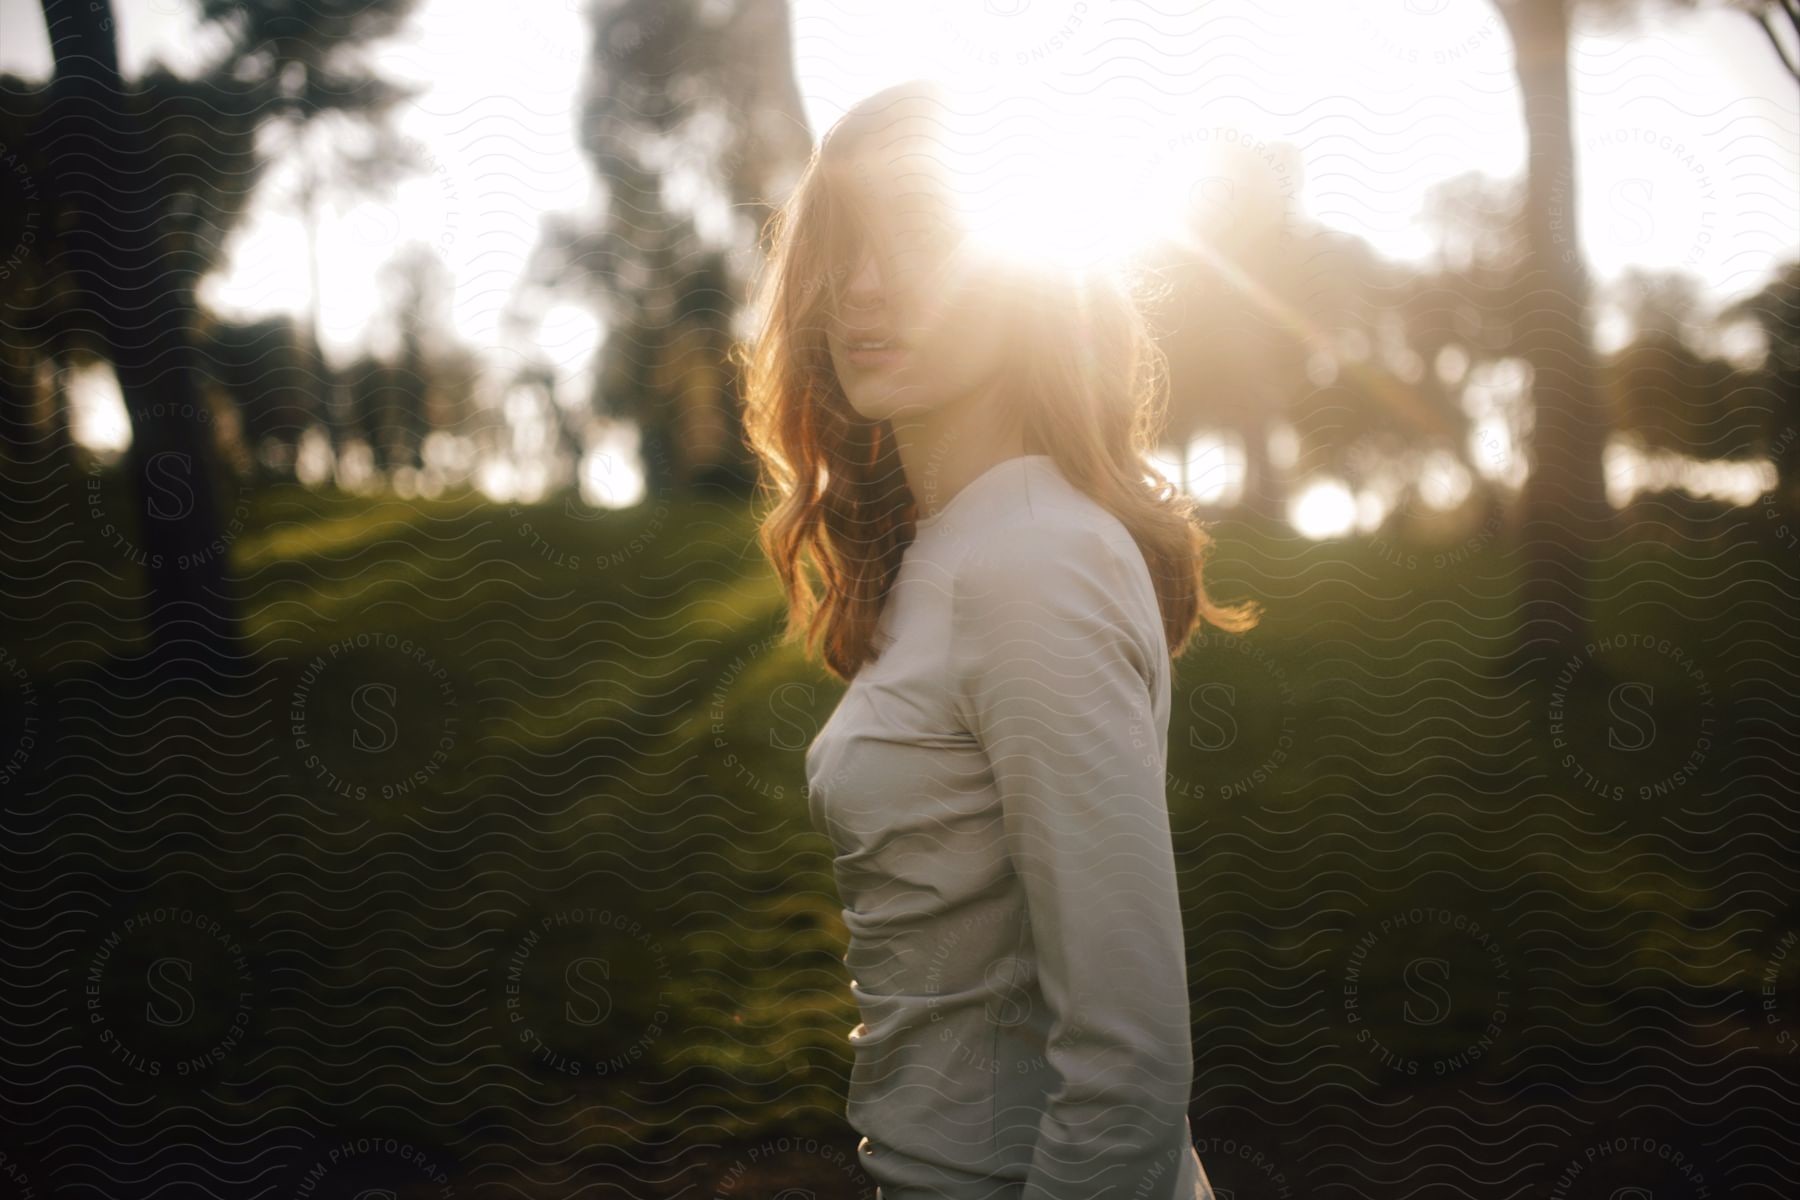 redhead woman wearing white clothes standing outdoors during day time with the sunlight distorting part of her face